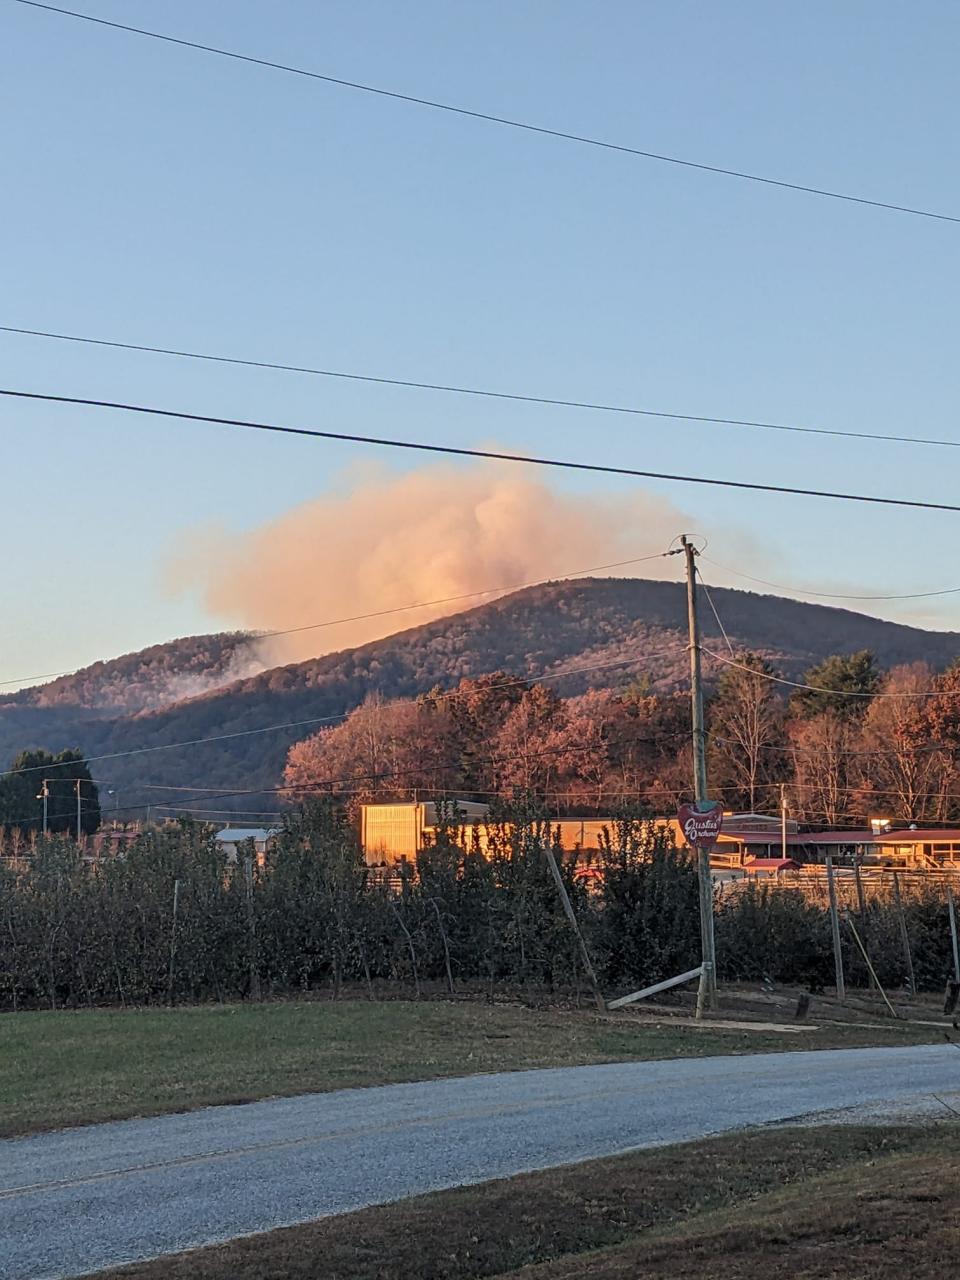 Brian Merrell took this photo of the brush fire on Nov. 3 from his home near Justus Orchards.